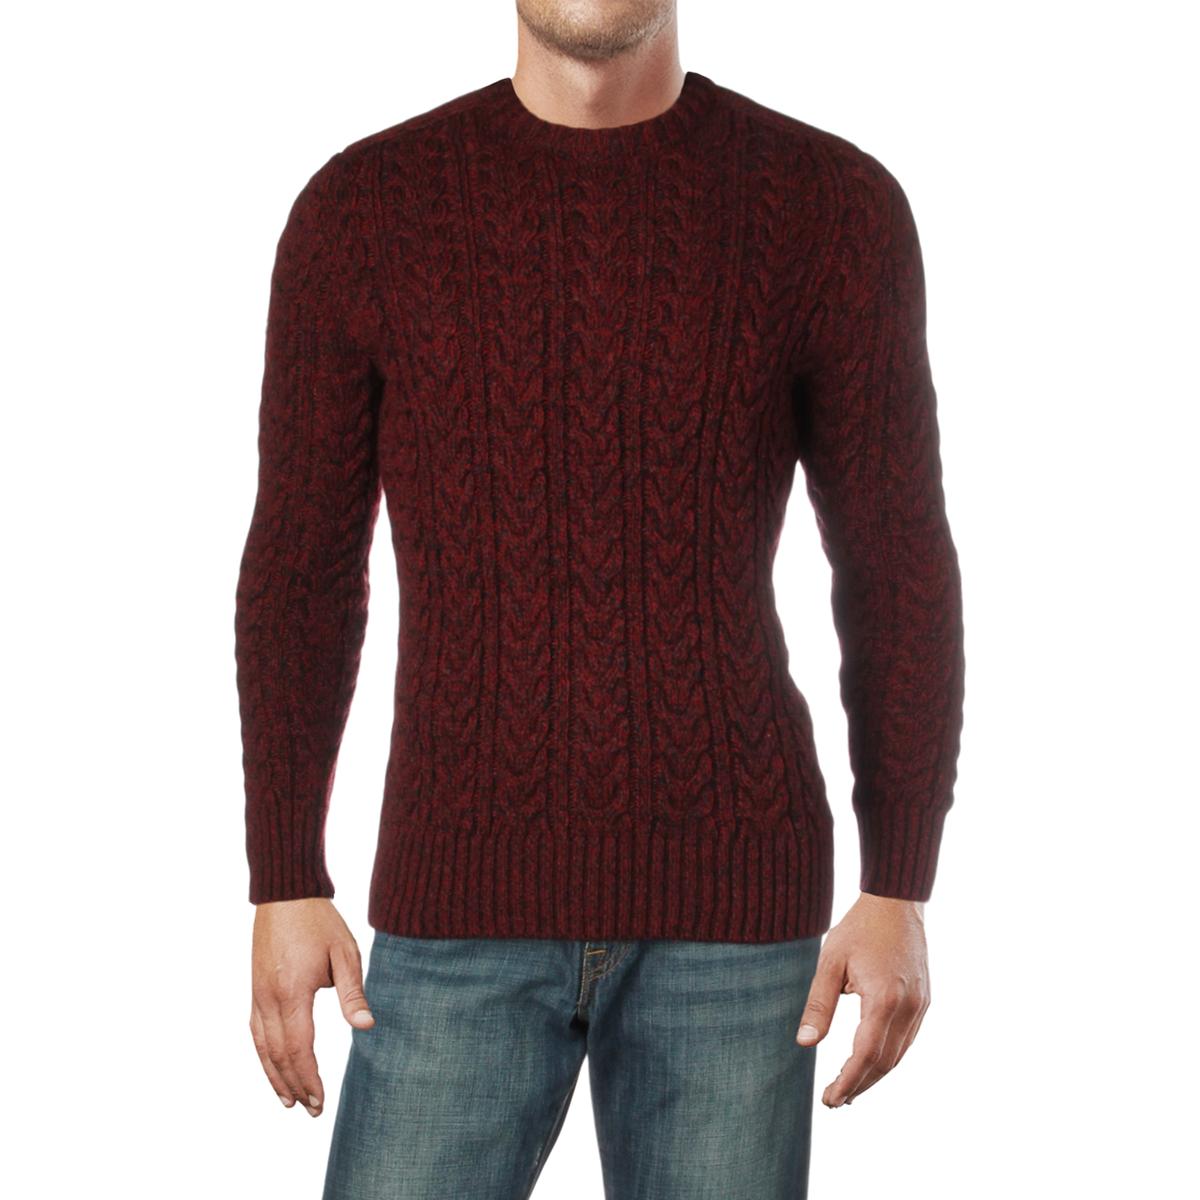 Superdry Mens Jacob Red Marled Cable Knit Shirt Crewneck Sweater Top S ...